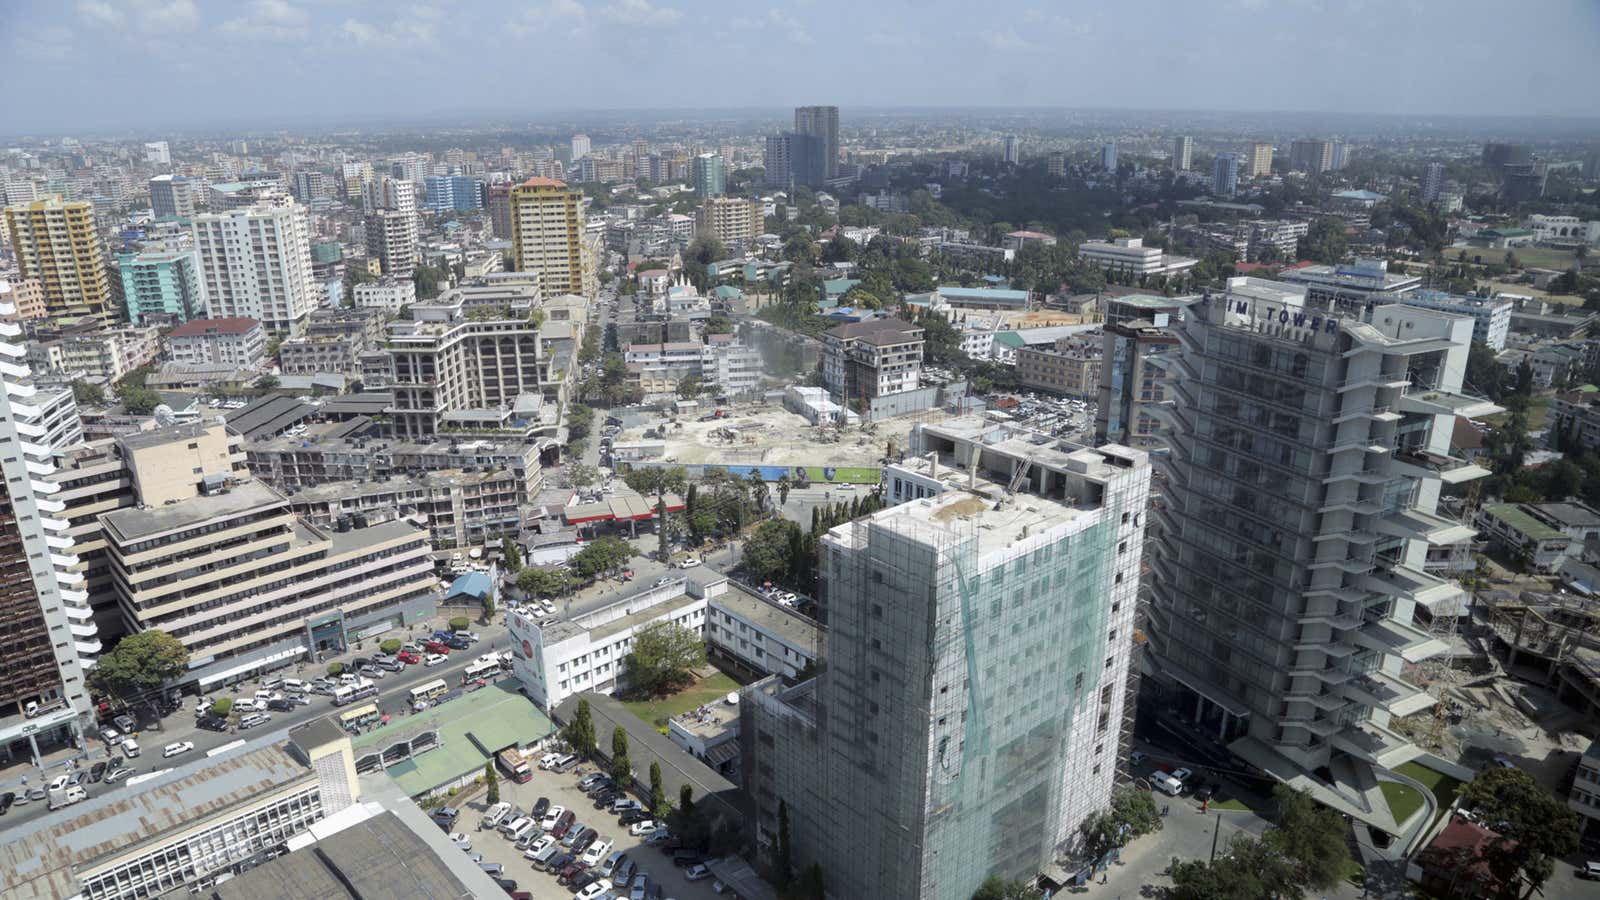 FBME is headquartered in Dar es Salaam, Tanzania’s commercial capital.